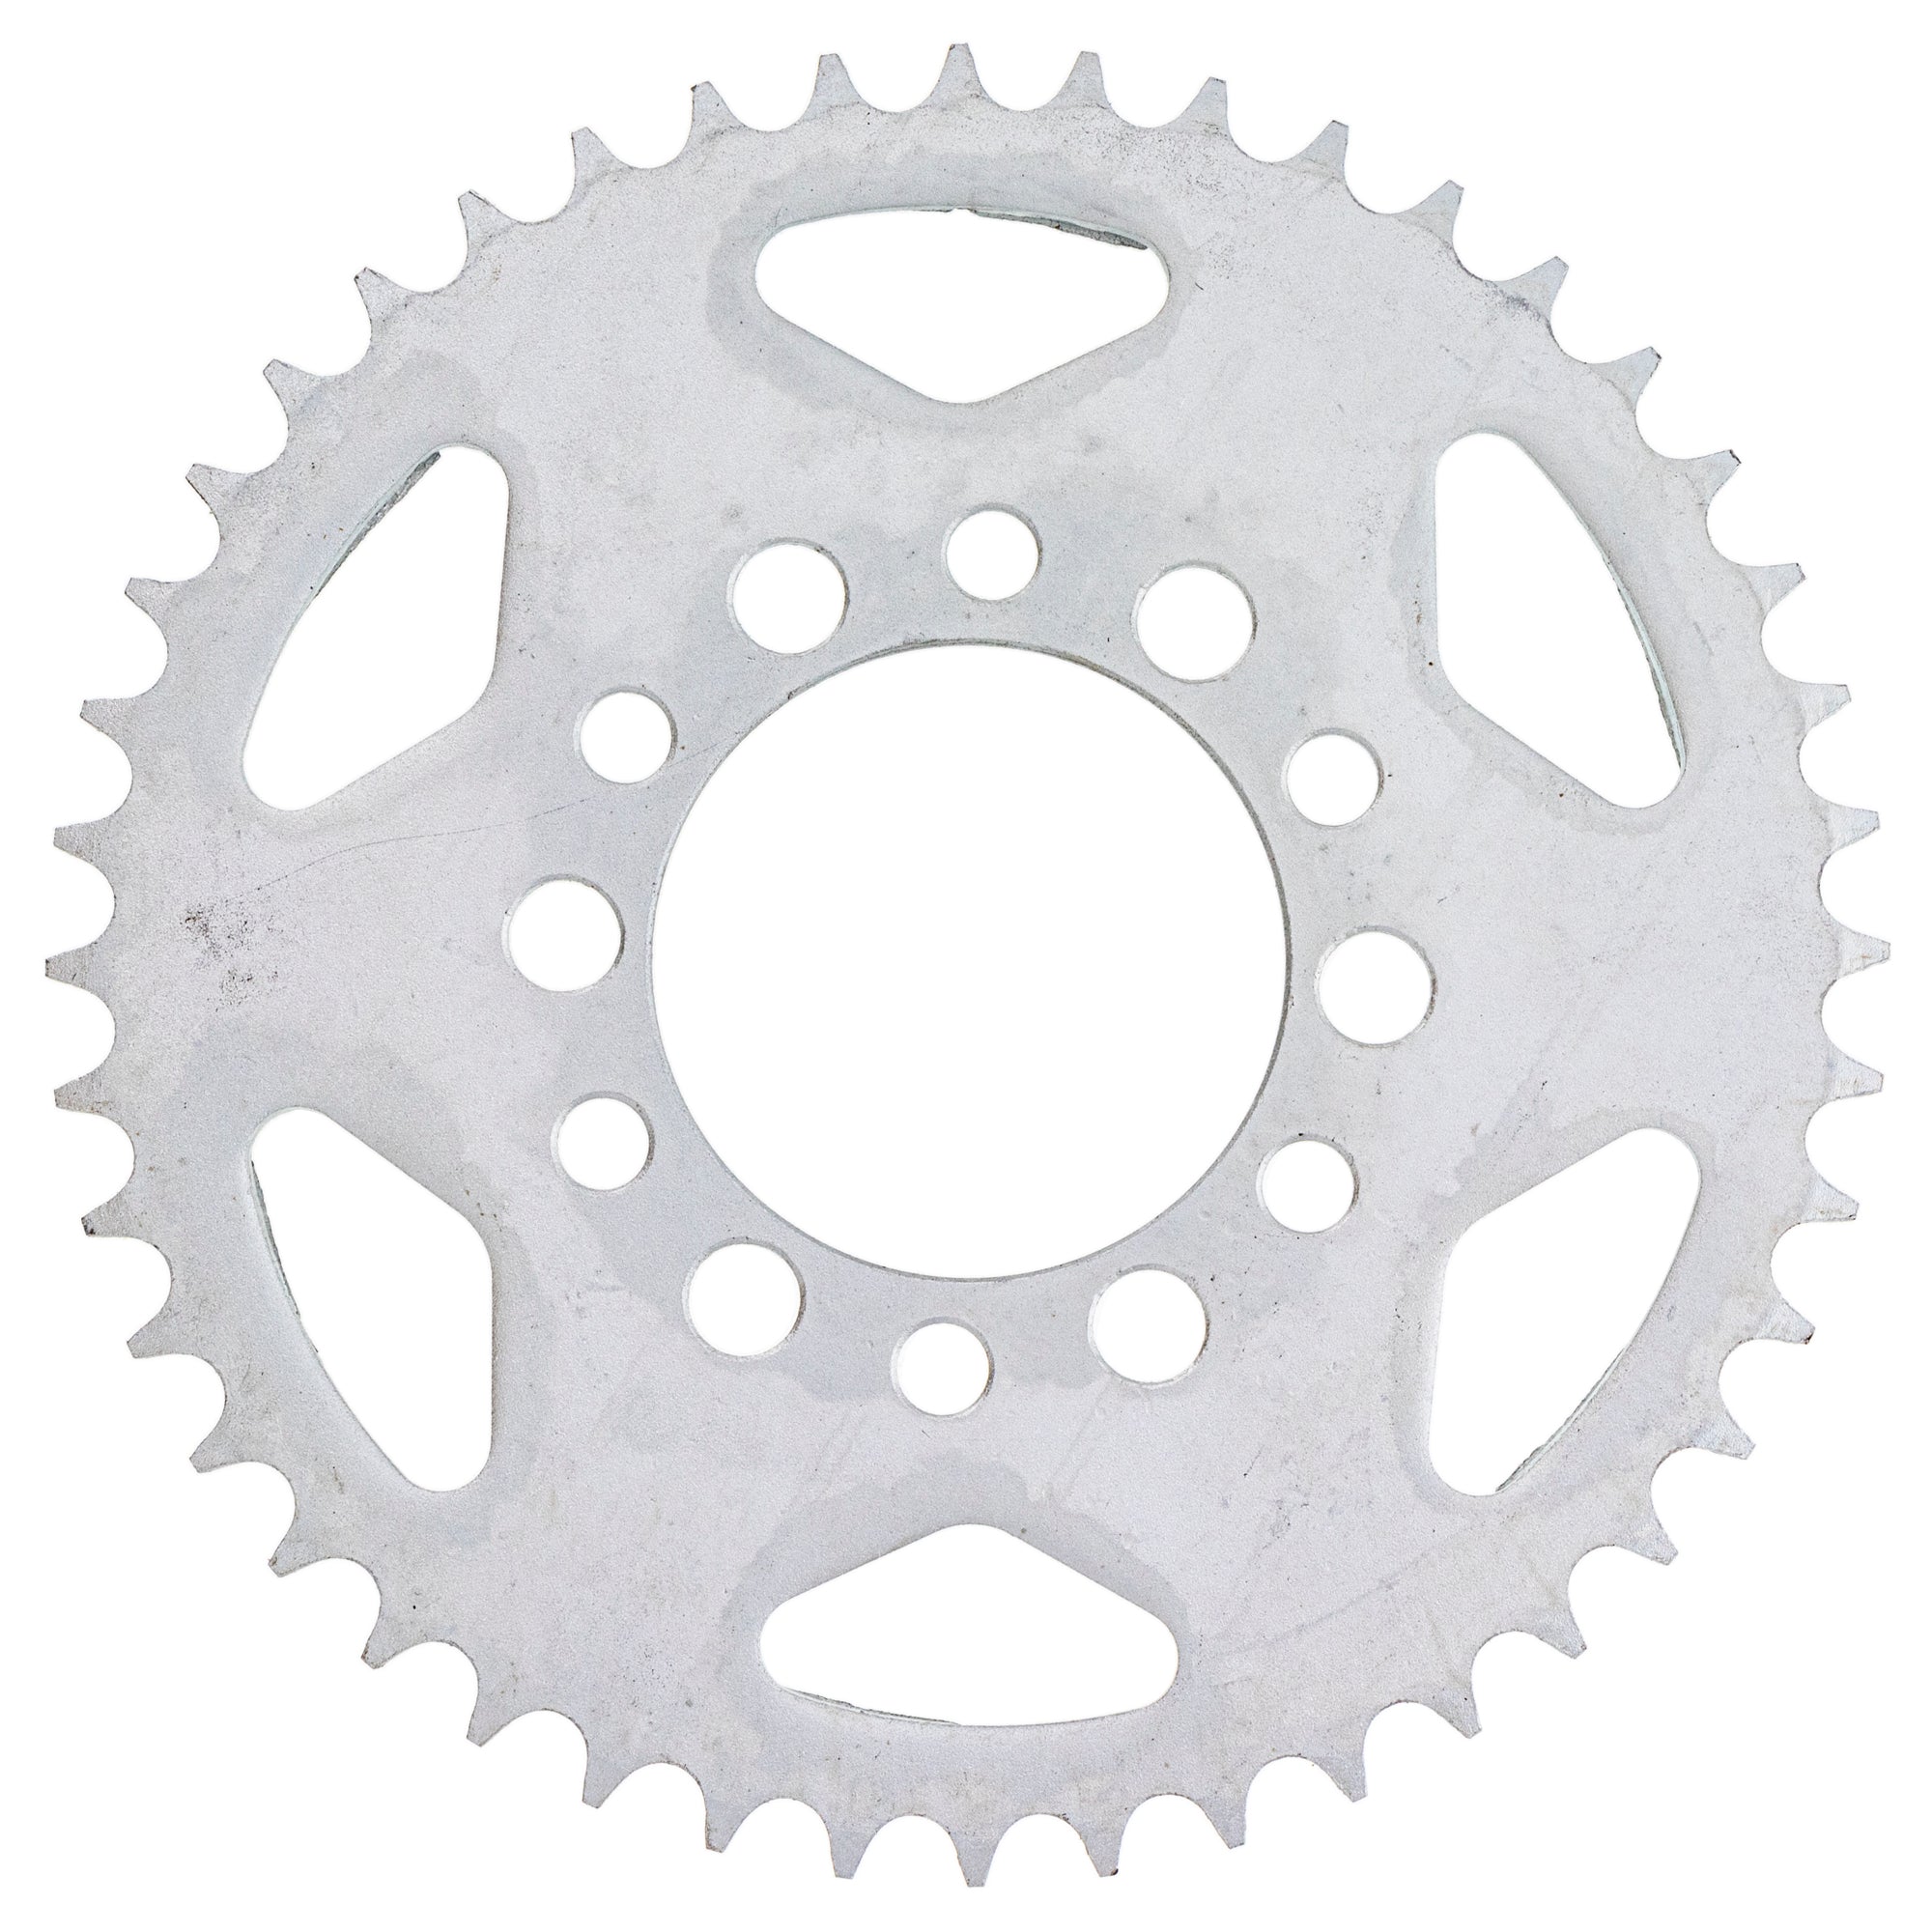 428 Pitch Front 13T Rear 44T Drive Sprocket Kit for Yamaha YZ80